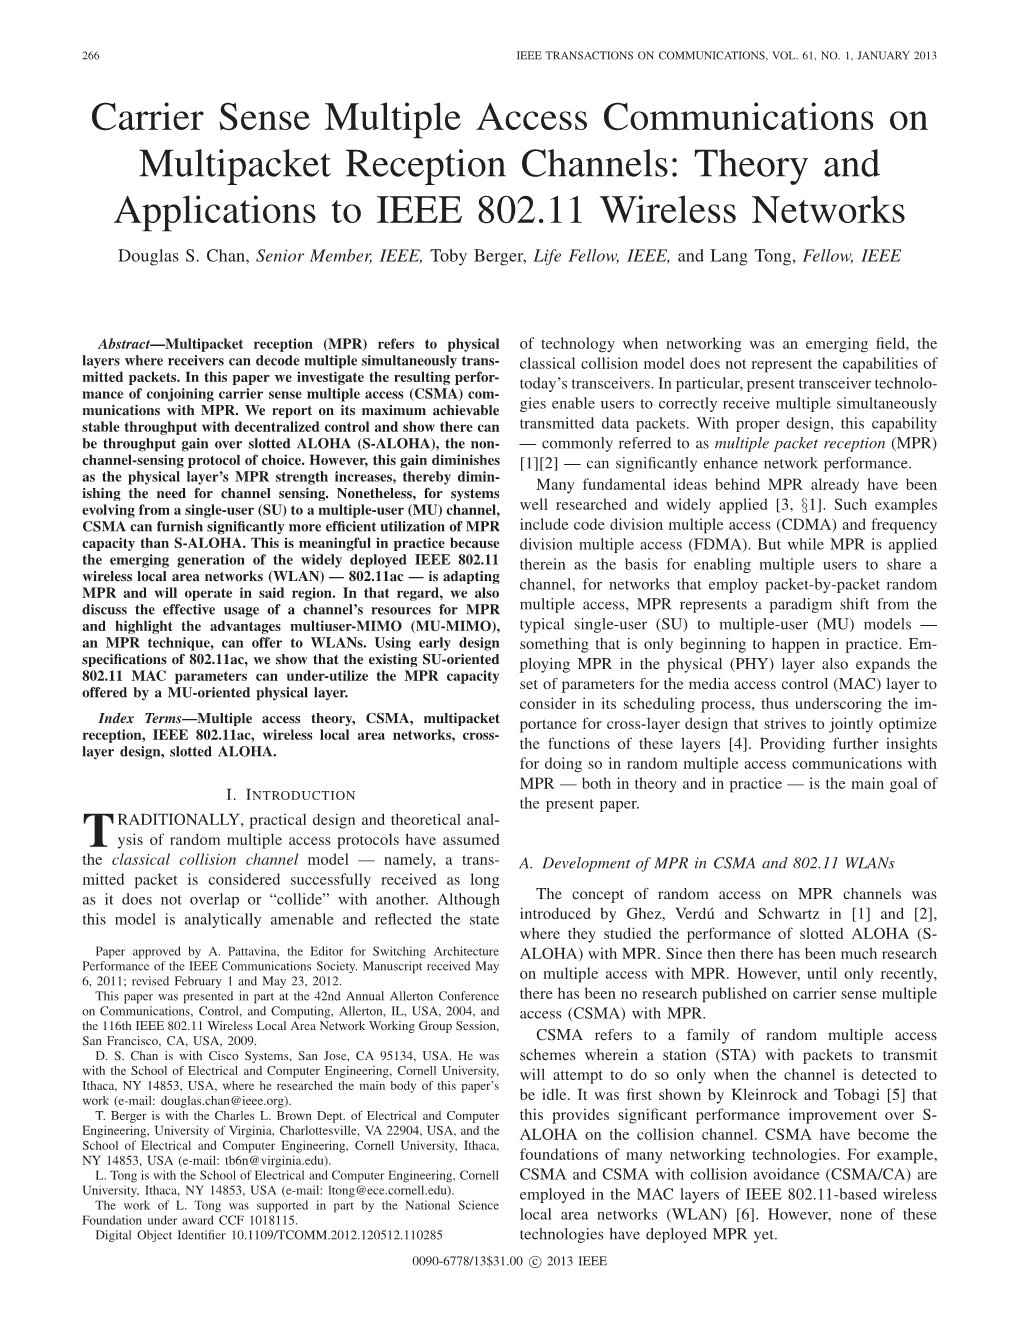 Theory and Applications to IEEE 802.11 Wireless Networks Douglas S